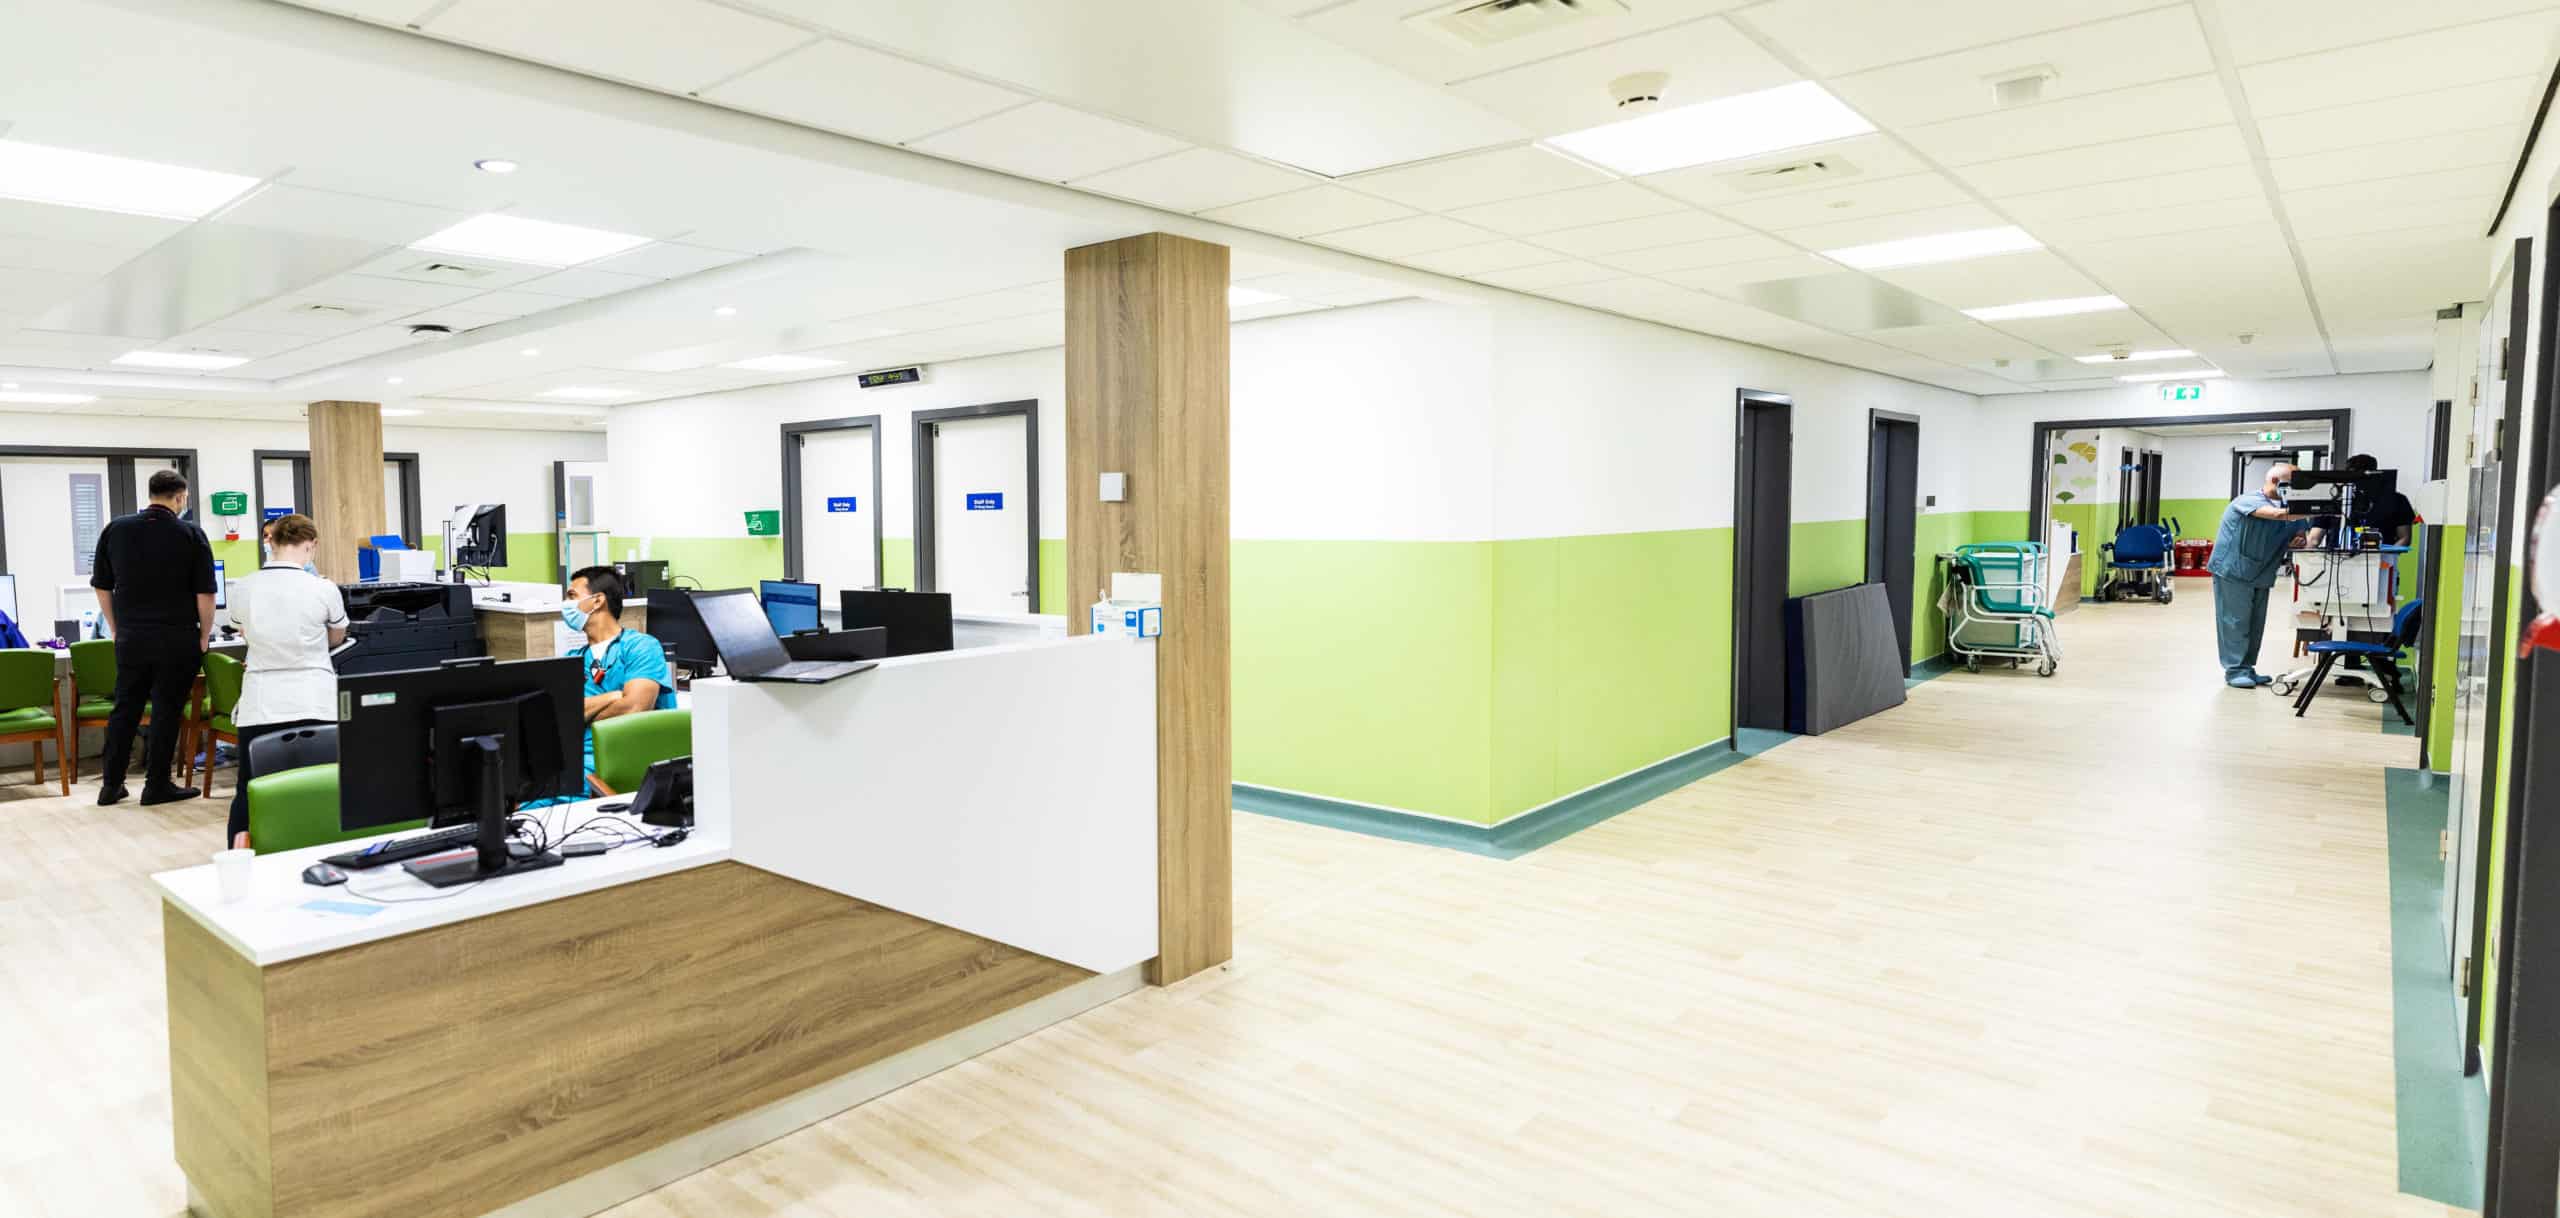 Modular hospital building completed through offsite construction. View of the reception and waiting area, as well as the corridor into treatment rooms. 